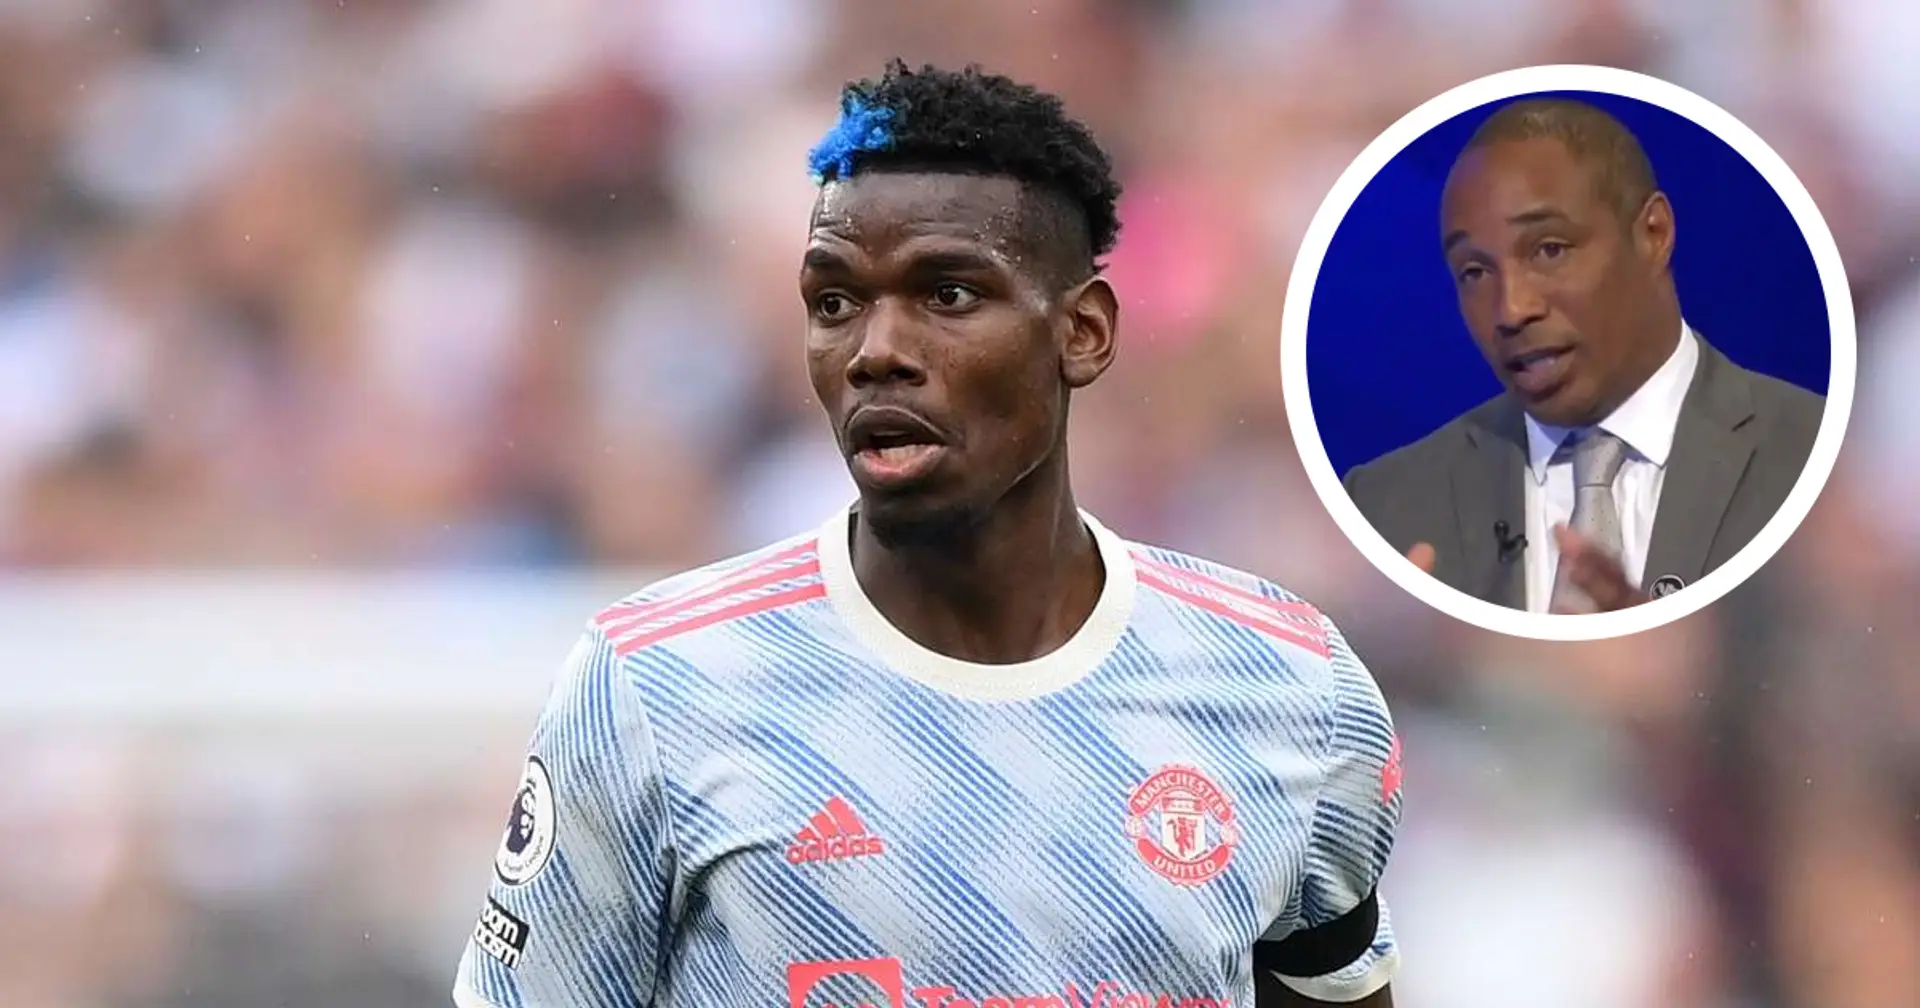 'It's their own fault!': Paul Ince slams Man United over Pogba contract uncertainty